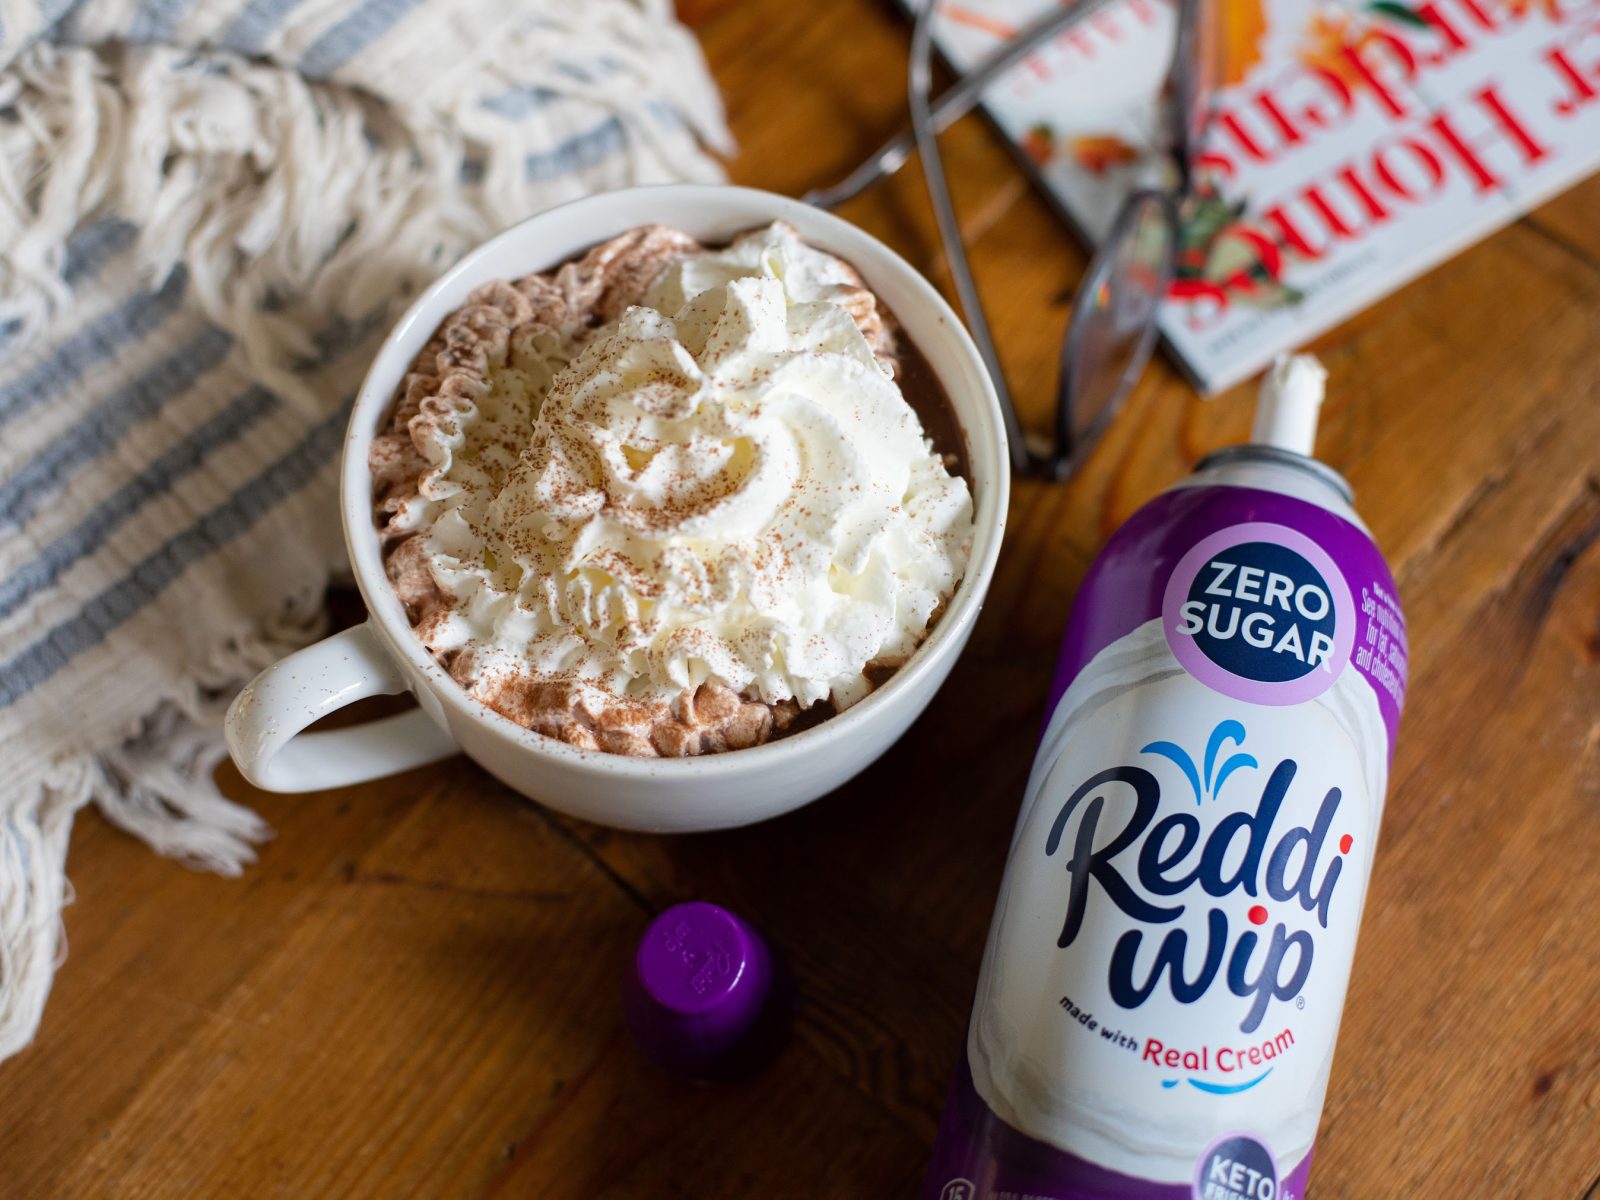 Reddi-wip Whipped Topping As Low As 50¢ At Publix